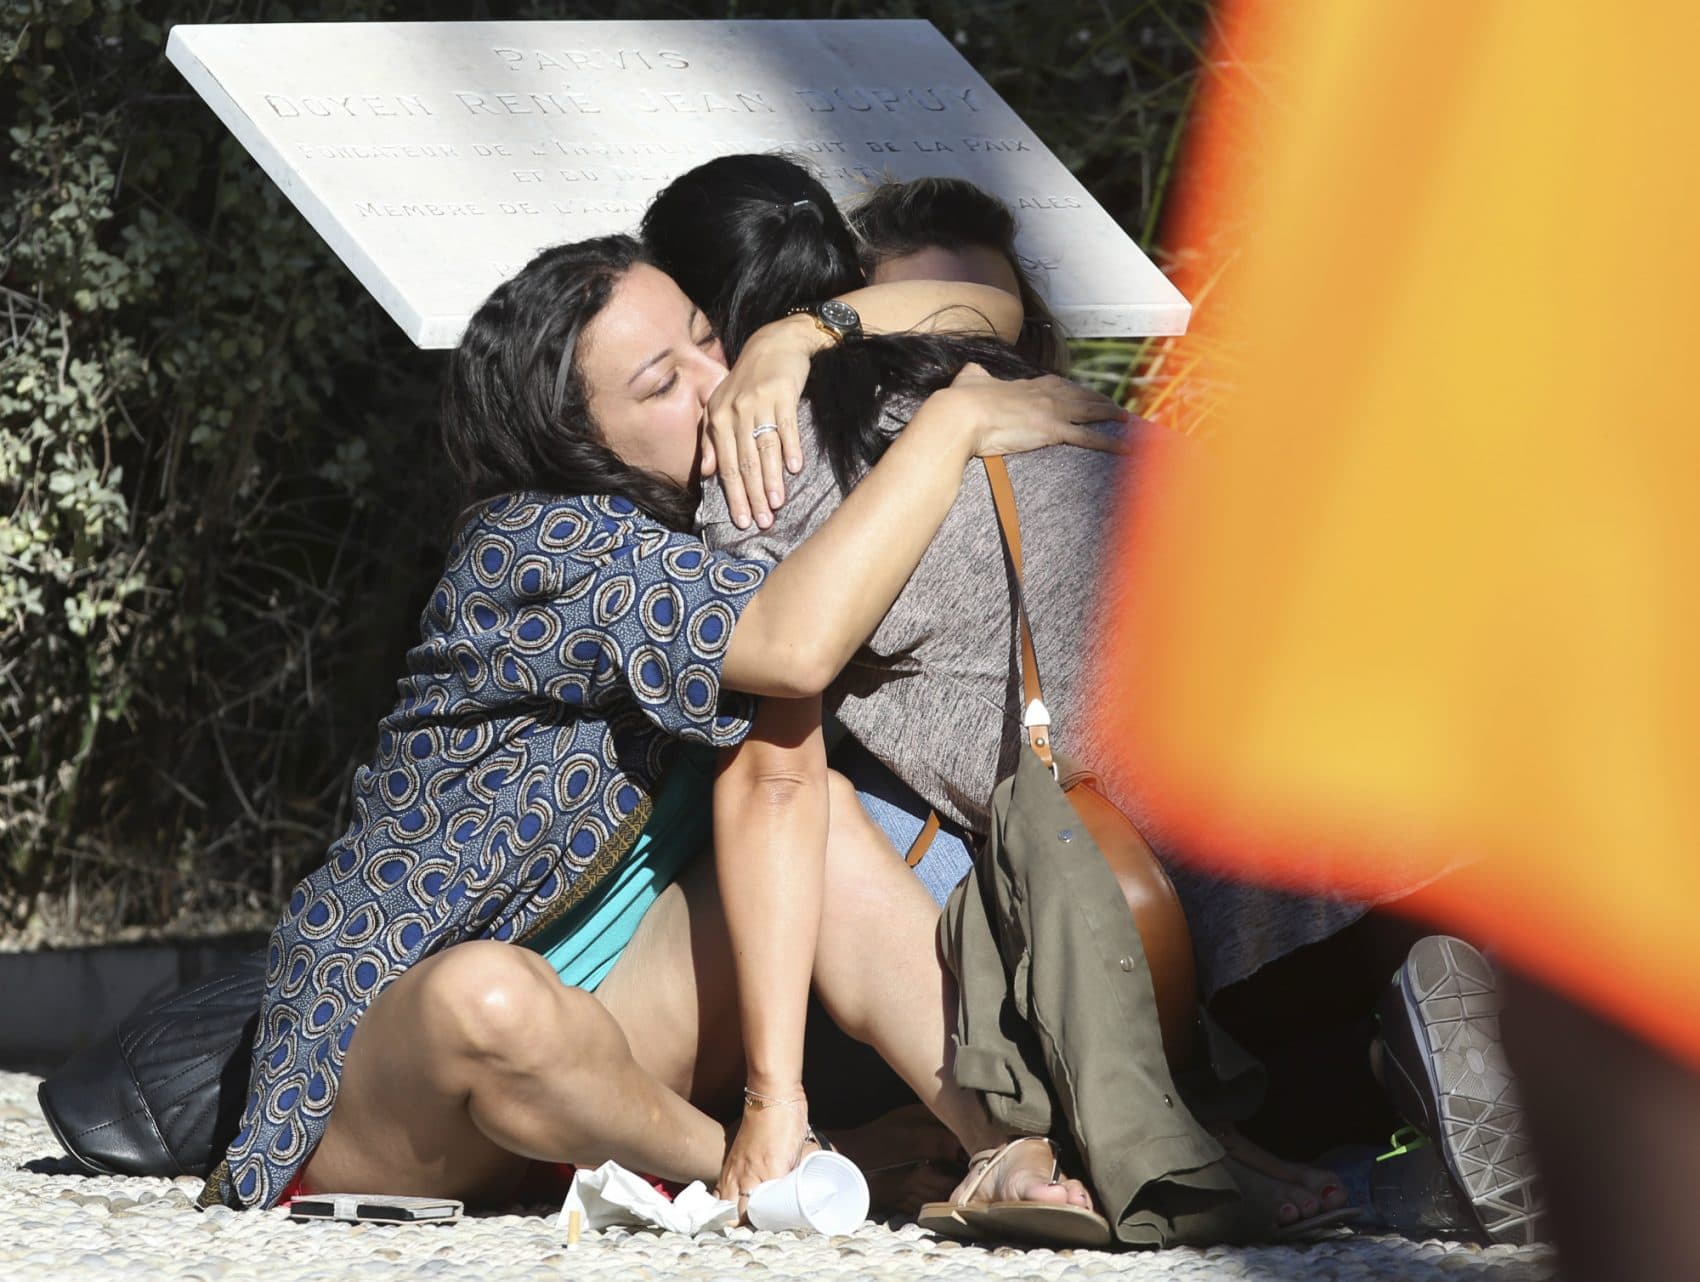 Parents of victims embrace each other near the scene of a truck attack  in Nice, southern France, Friday, July 15, 2016. A large truck mowed through revelers gathered for Bastille Day fireworks in Nice, killing more than 80 people and sending people fleeing into the sea as it bore down for more than a mile along the Riviera city's famed waterfront promenade. (Luca Bruno/AP)